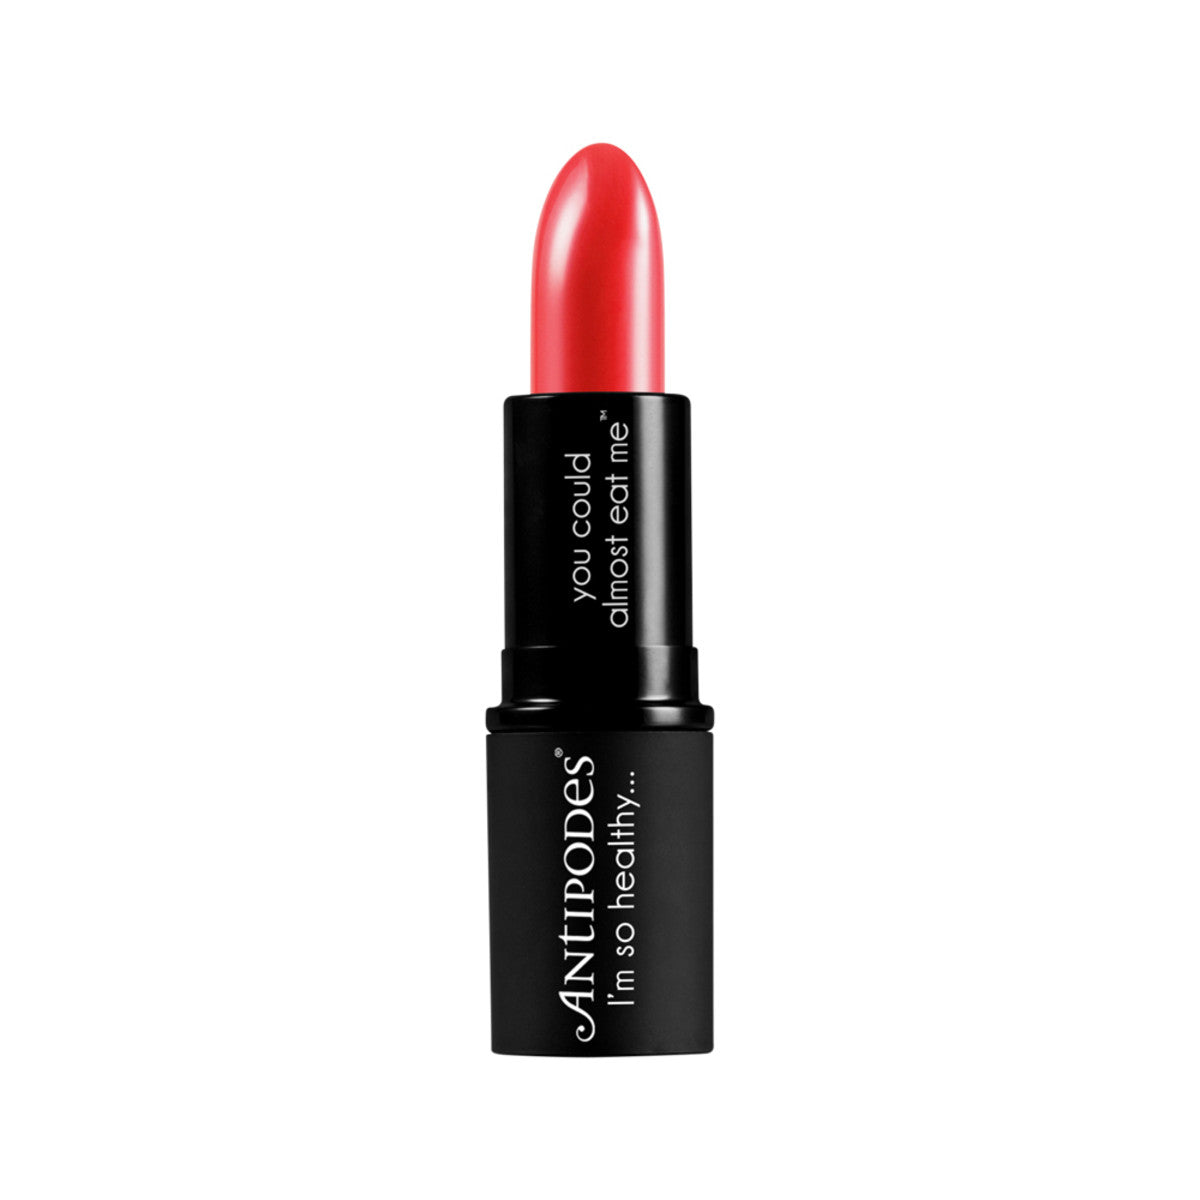 Antipodes South Pacific Coral Moisture-Boost Natural Lipstick 4g-The Living Co.